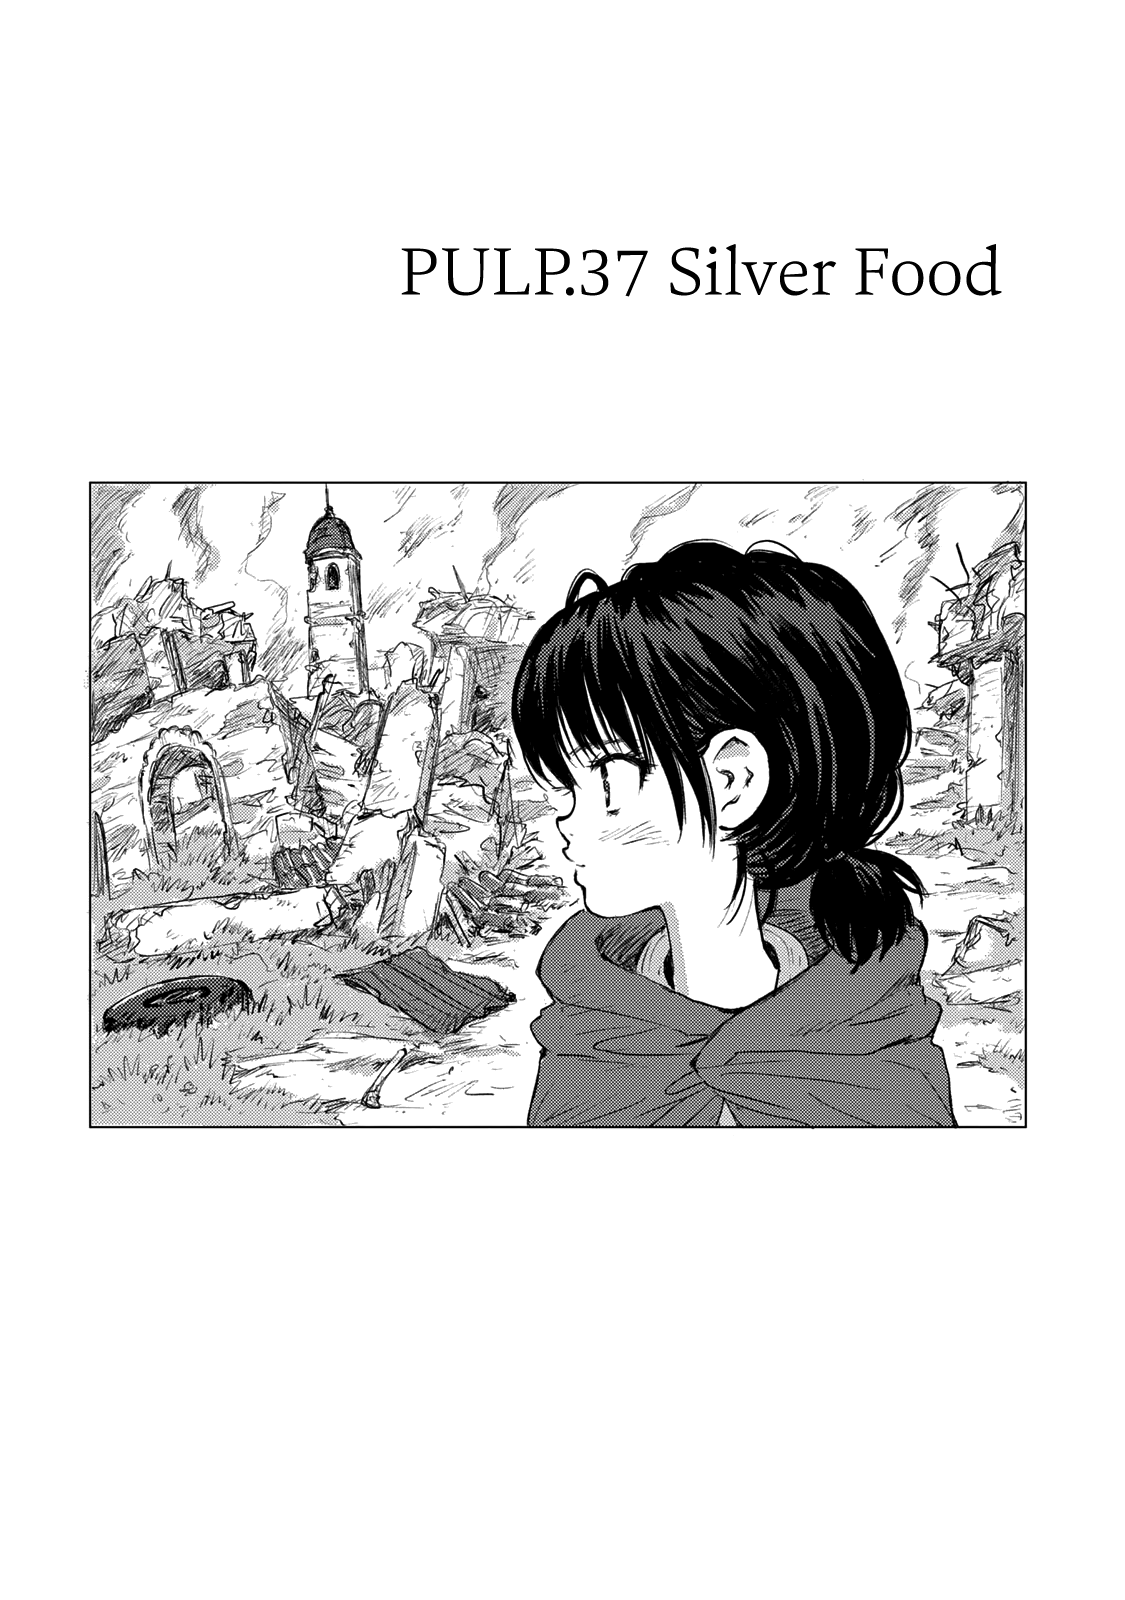 Candy & Cigarettes Vol.8 Chapter 37: Silver Food - Picture 3